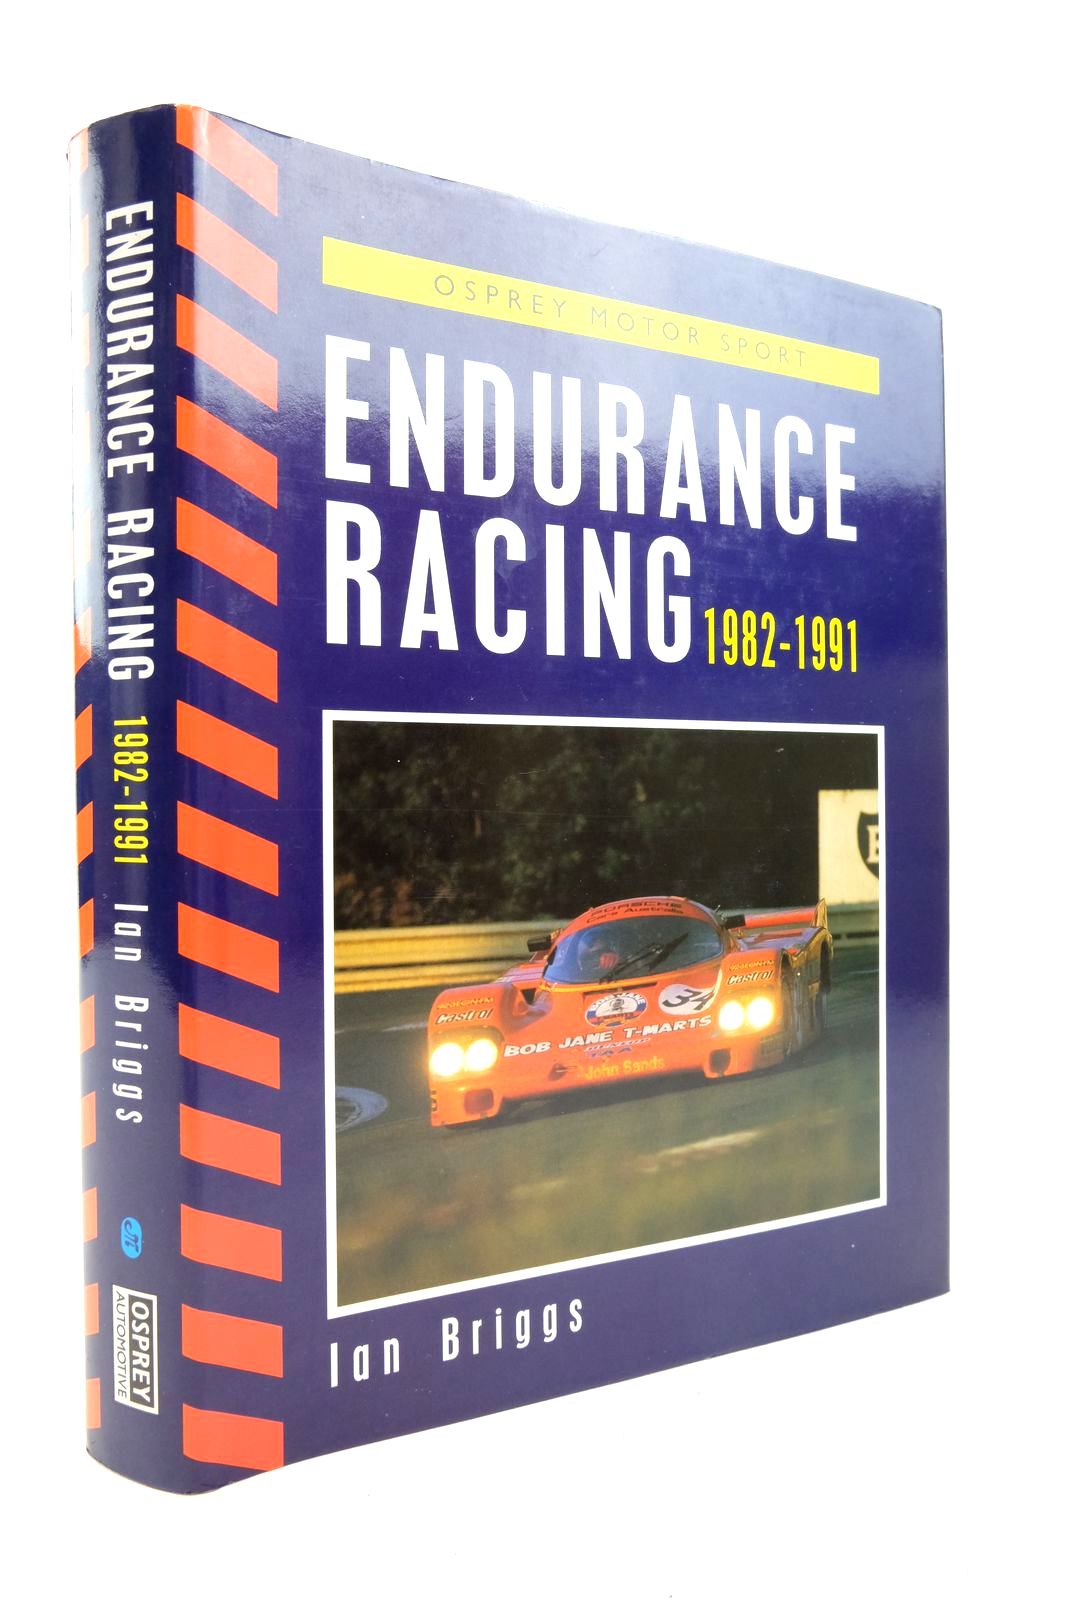 Photo of ENDURANCE RACING 1982-1991 written by Briggs, Ian published by Osprey Automotive (STOCK CODE: 2137499)  for sale by Stella & Rose's Books